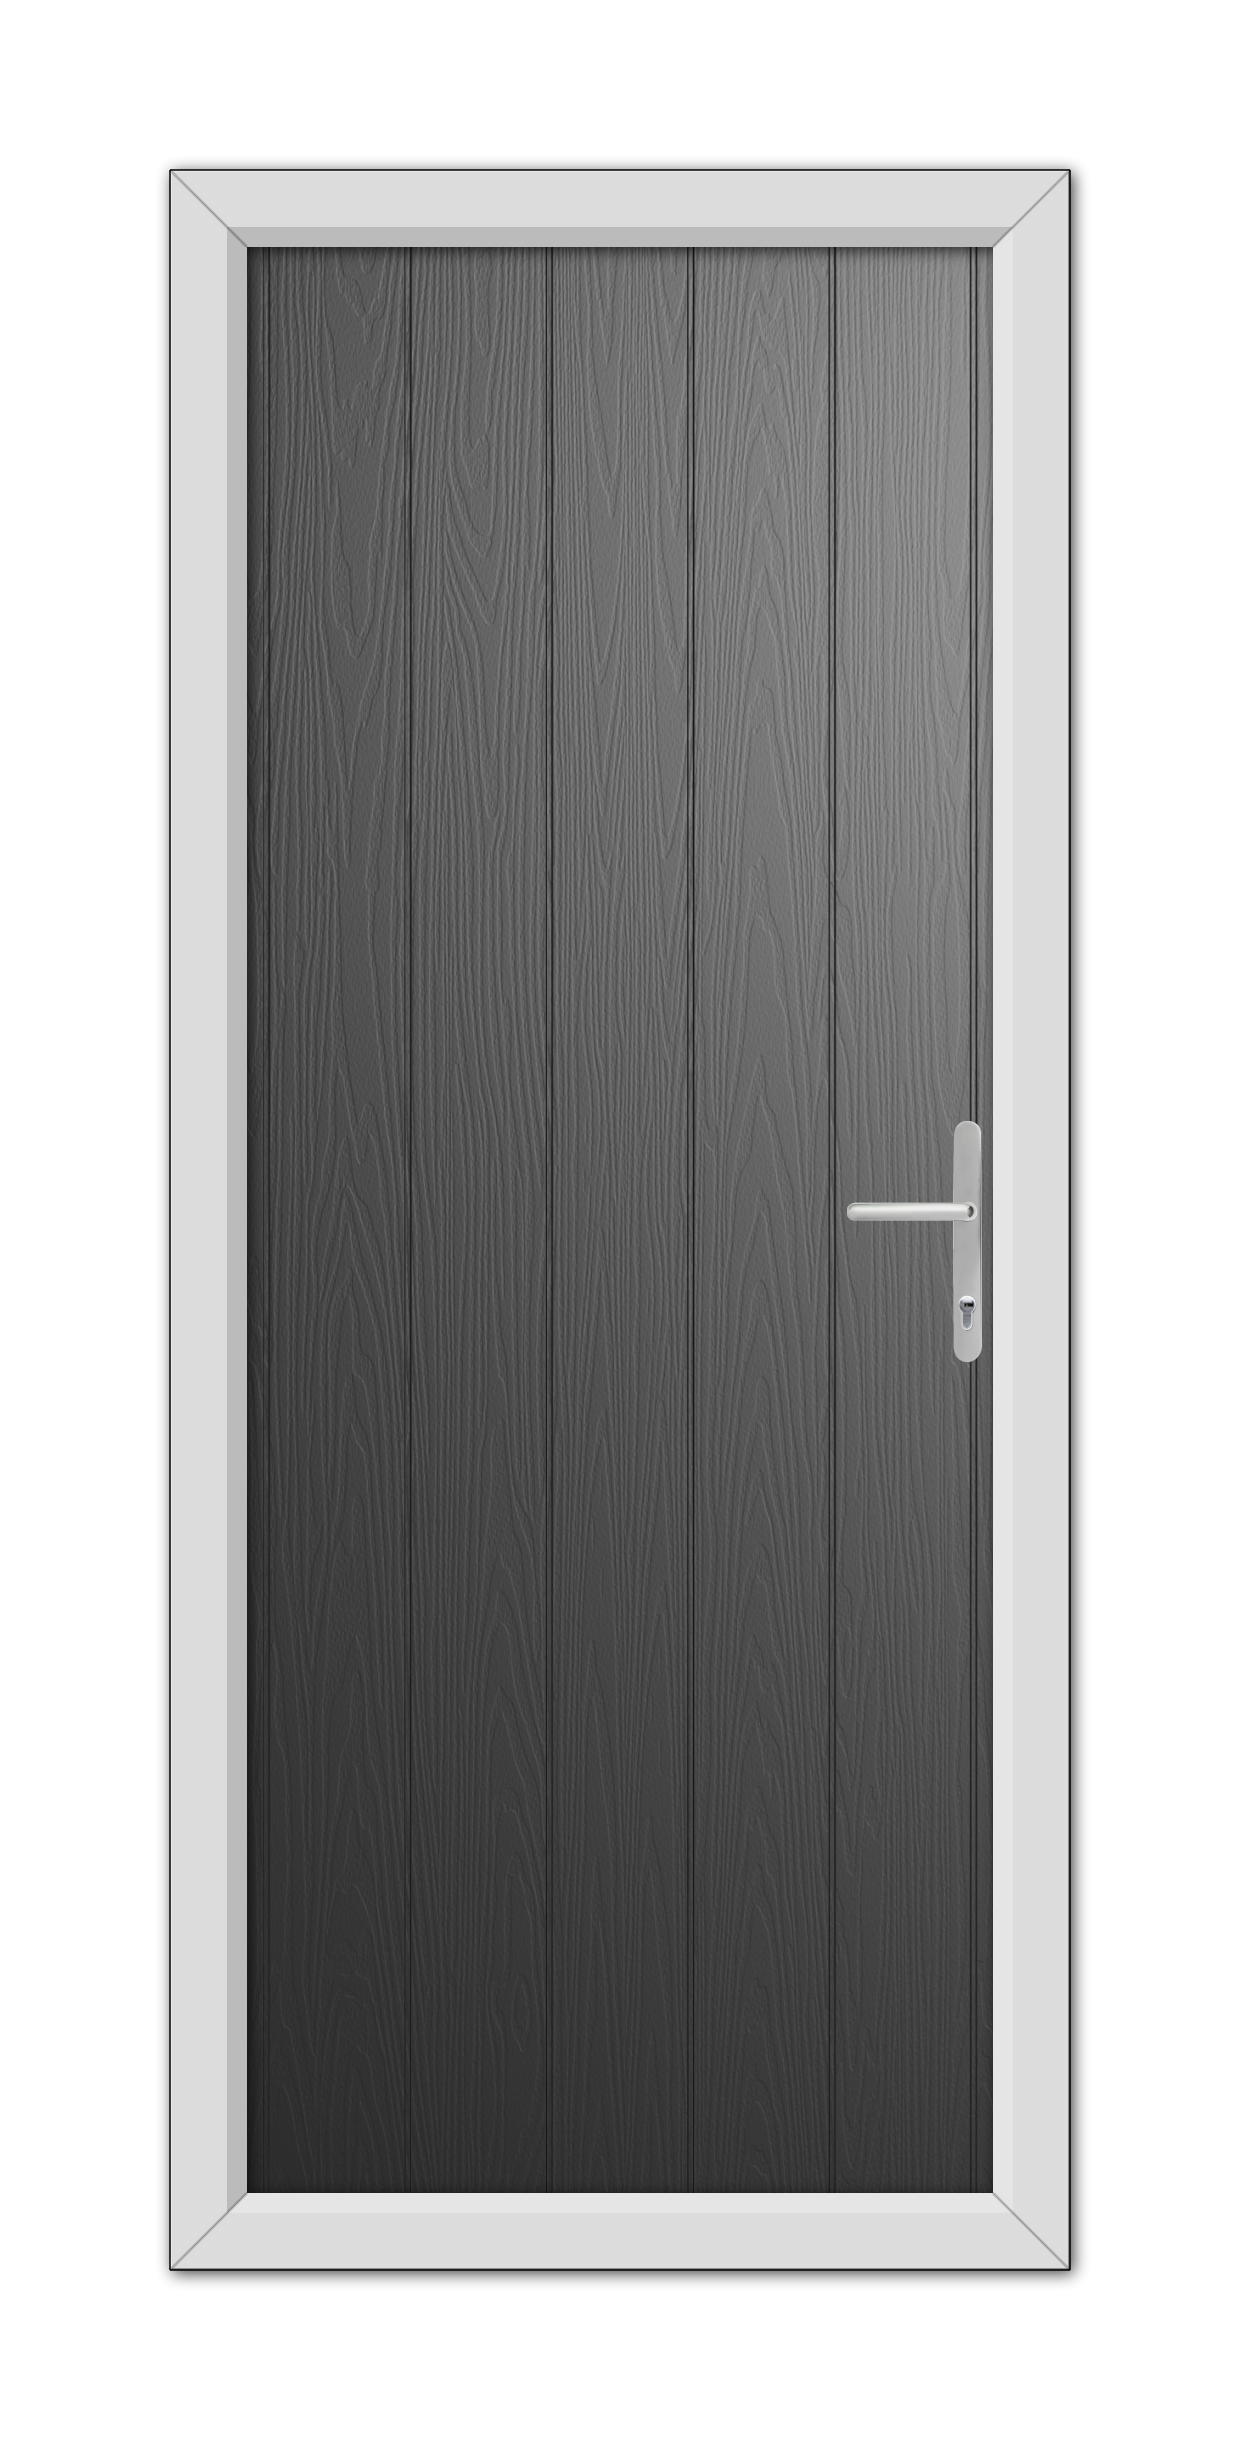 A modern Black Gloucester Composite Door 48mm Timber Core with a silver handle, framed by a light gray trim in a white wall.